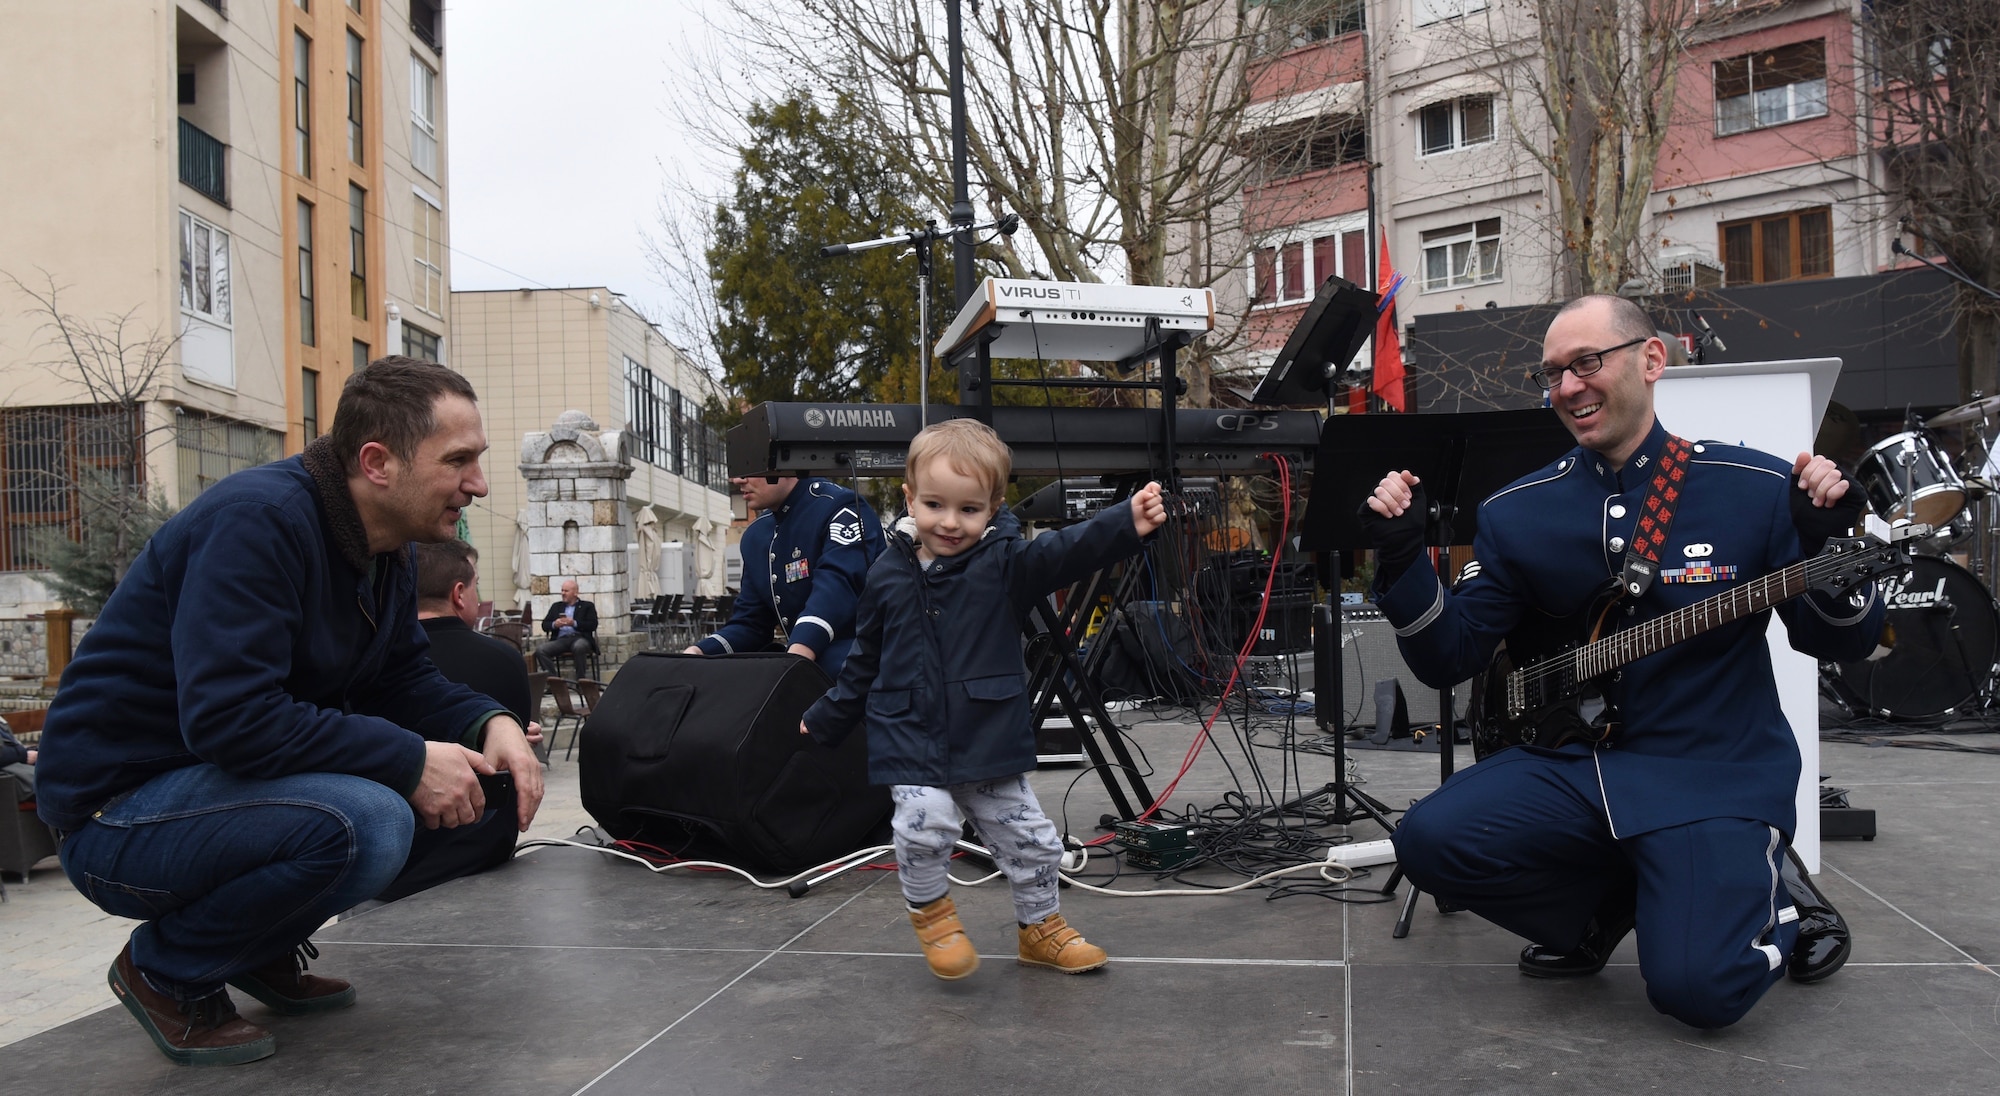 The U.S. Air Forces in Europe Band interacts with community members before a performance in Prizren, Kosovo, Feb. 18, 2018. The band was in Kosovo to celebrate the 10th anniversary of Kosovo independence. (U.S. Air Force photo by Maj. Tristan Hinderliter)